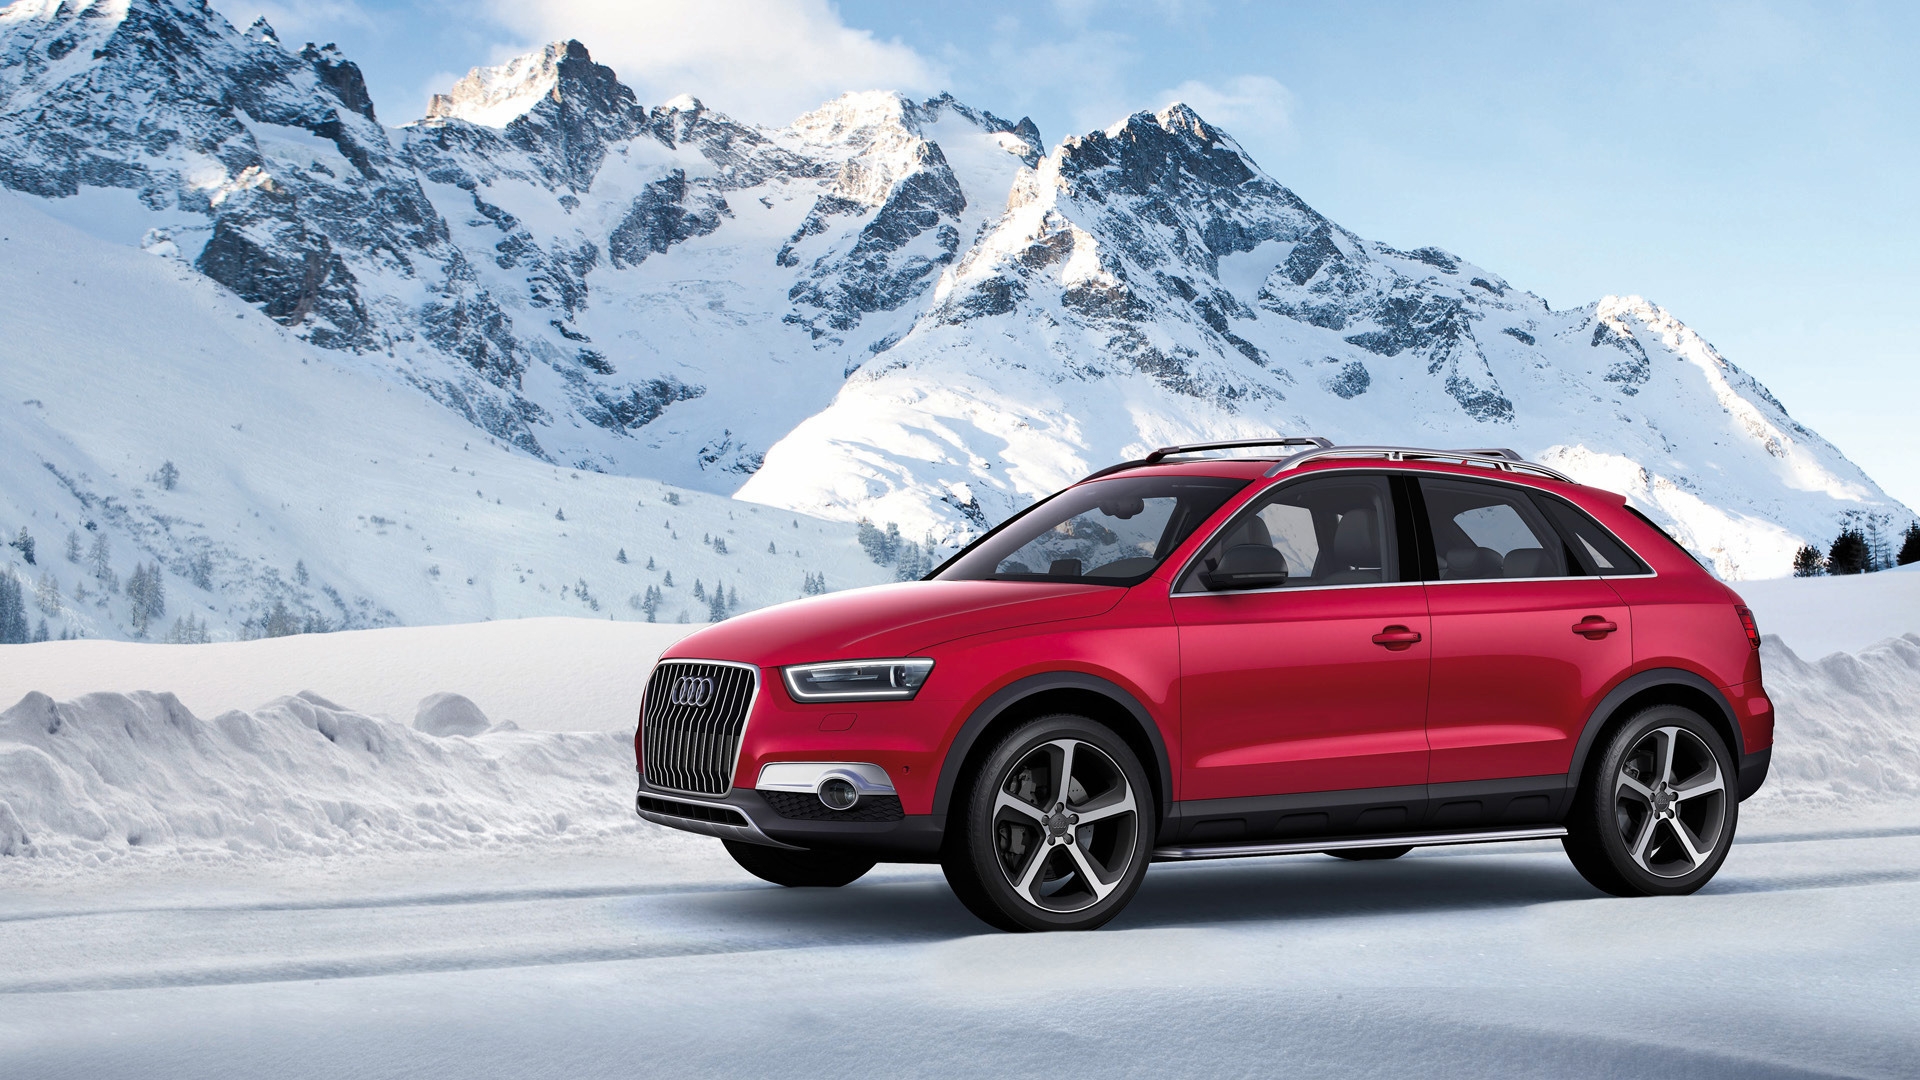 Audi Q3 Vail 2012 for 1920 x 1080 HDTV 1080p resolution